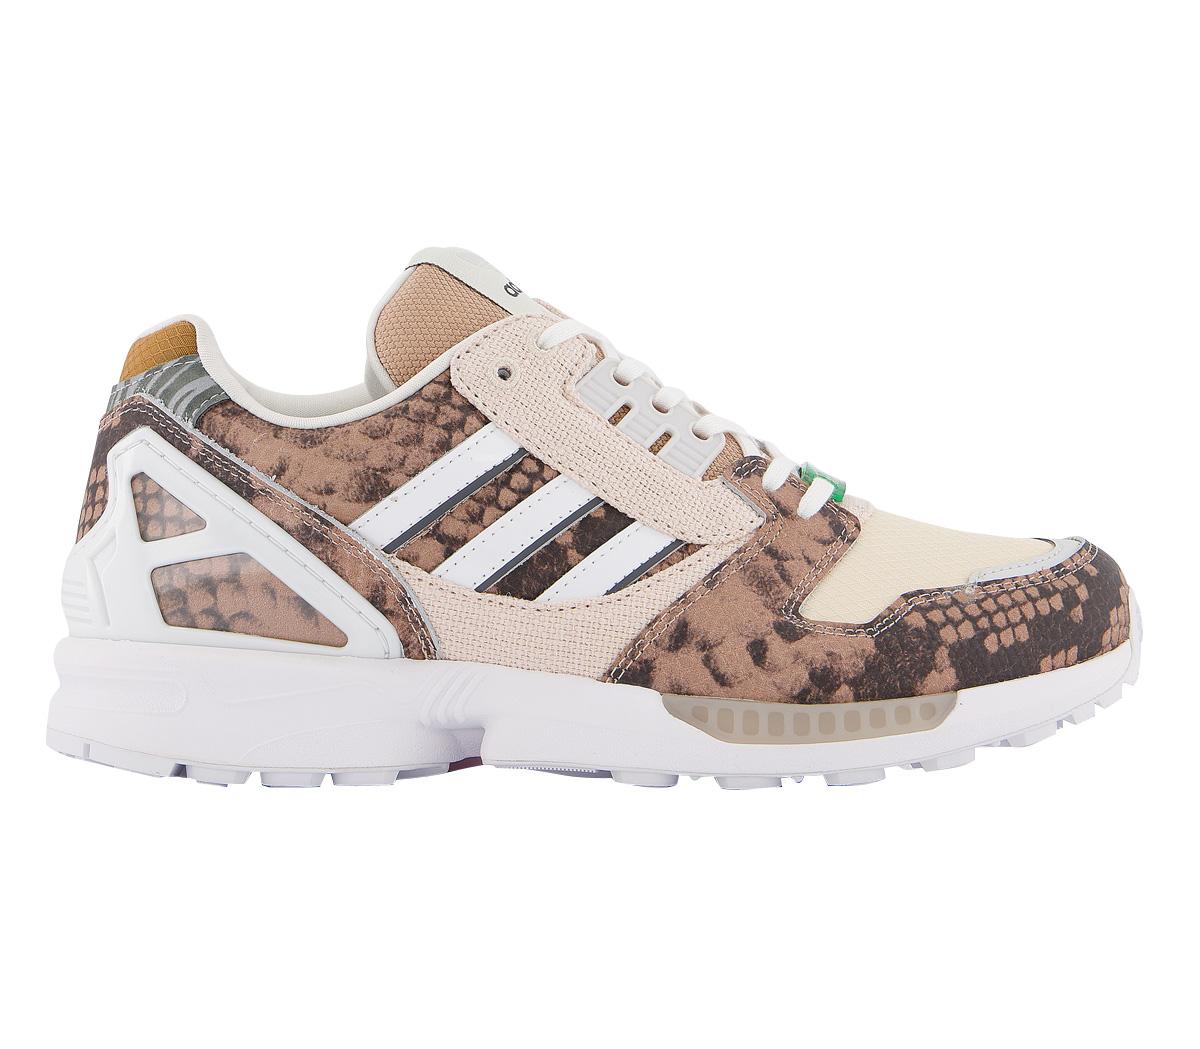 adidasZx 8000 TrainersPale Nude Chalk White Solar Red